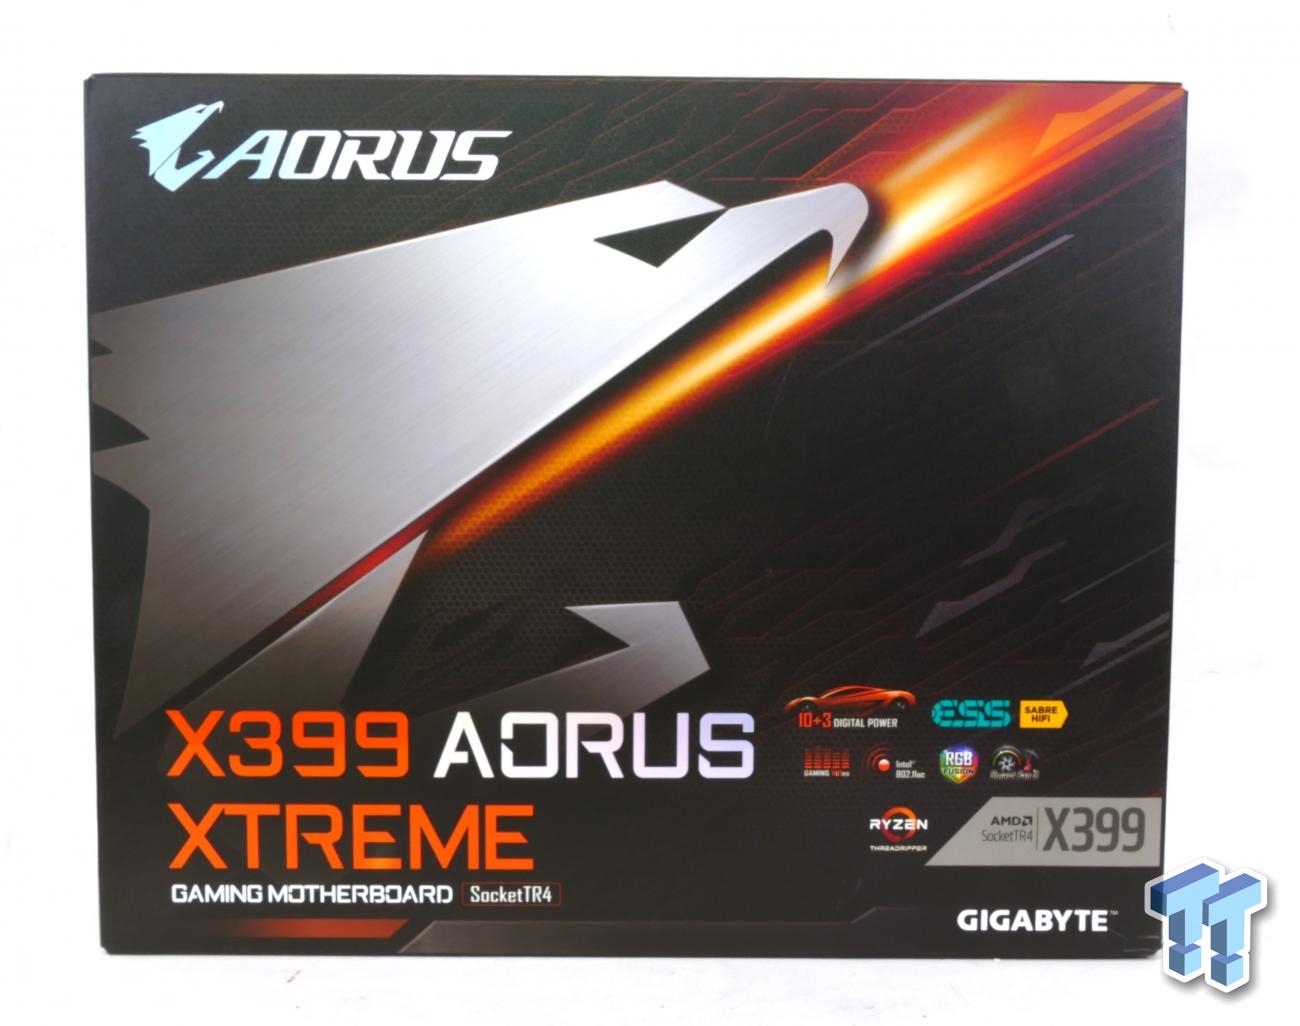 GIGABYTE X399 Aorus Xtreme (AMD X399) Motherboard Review